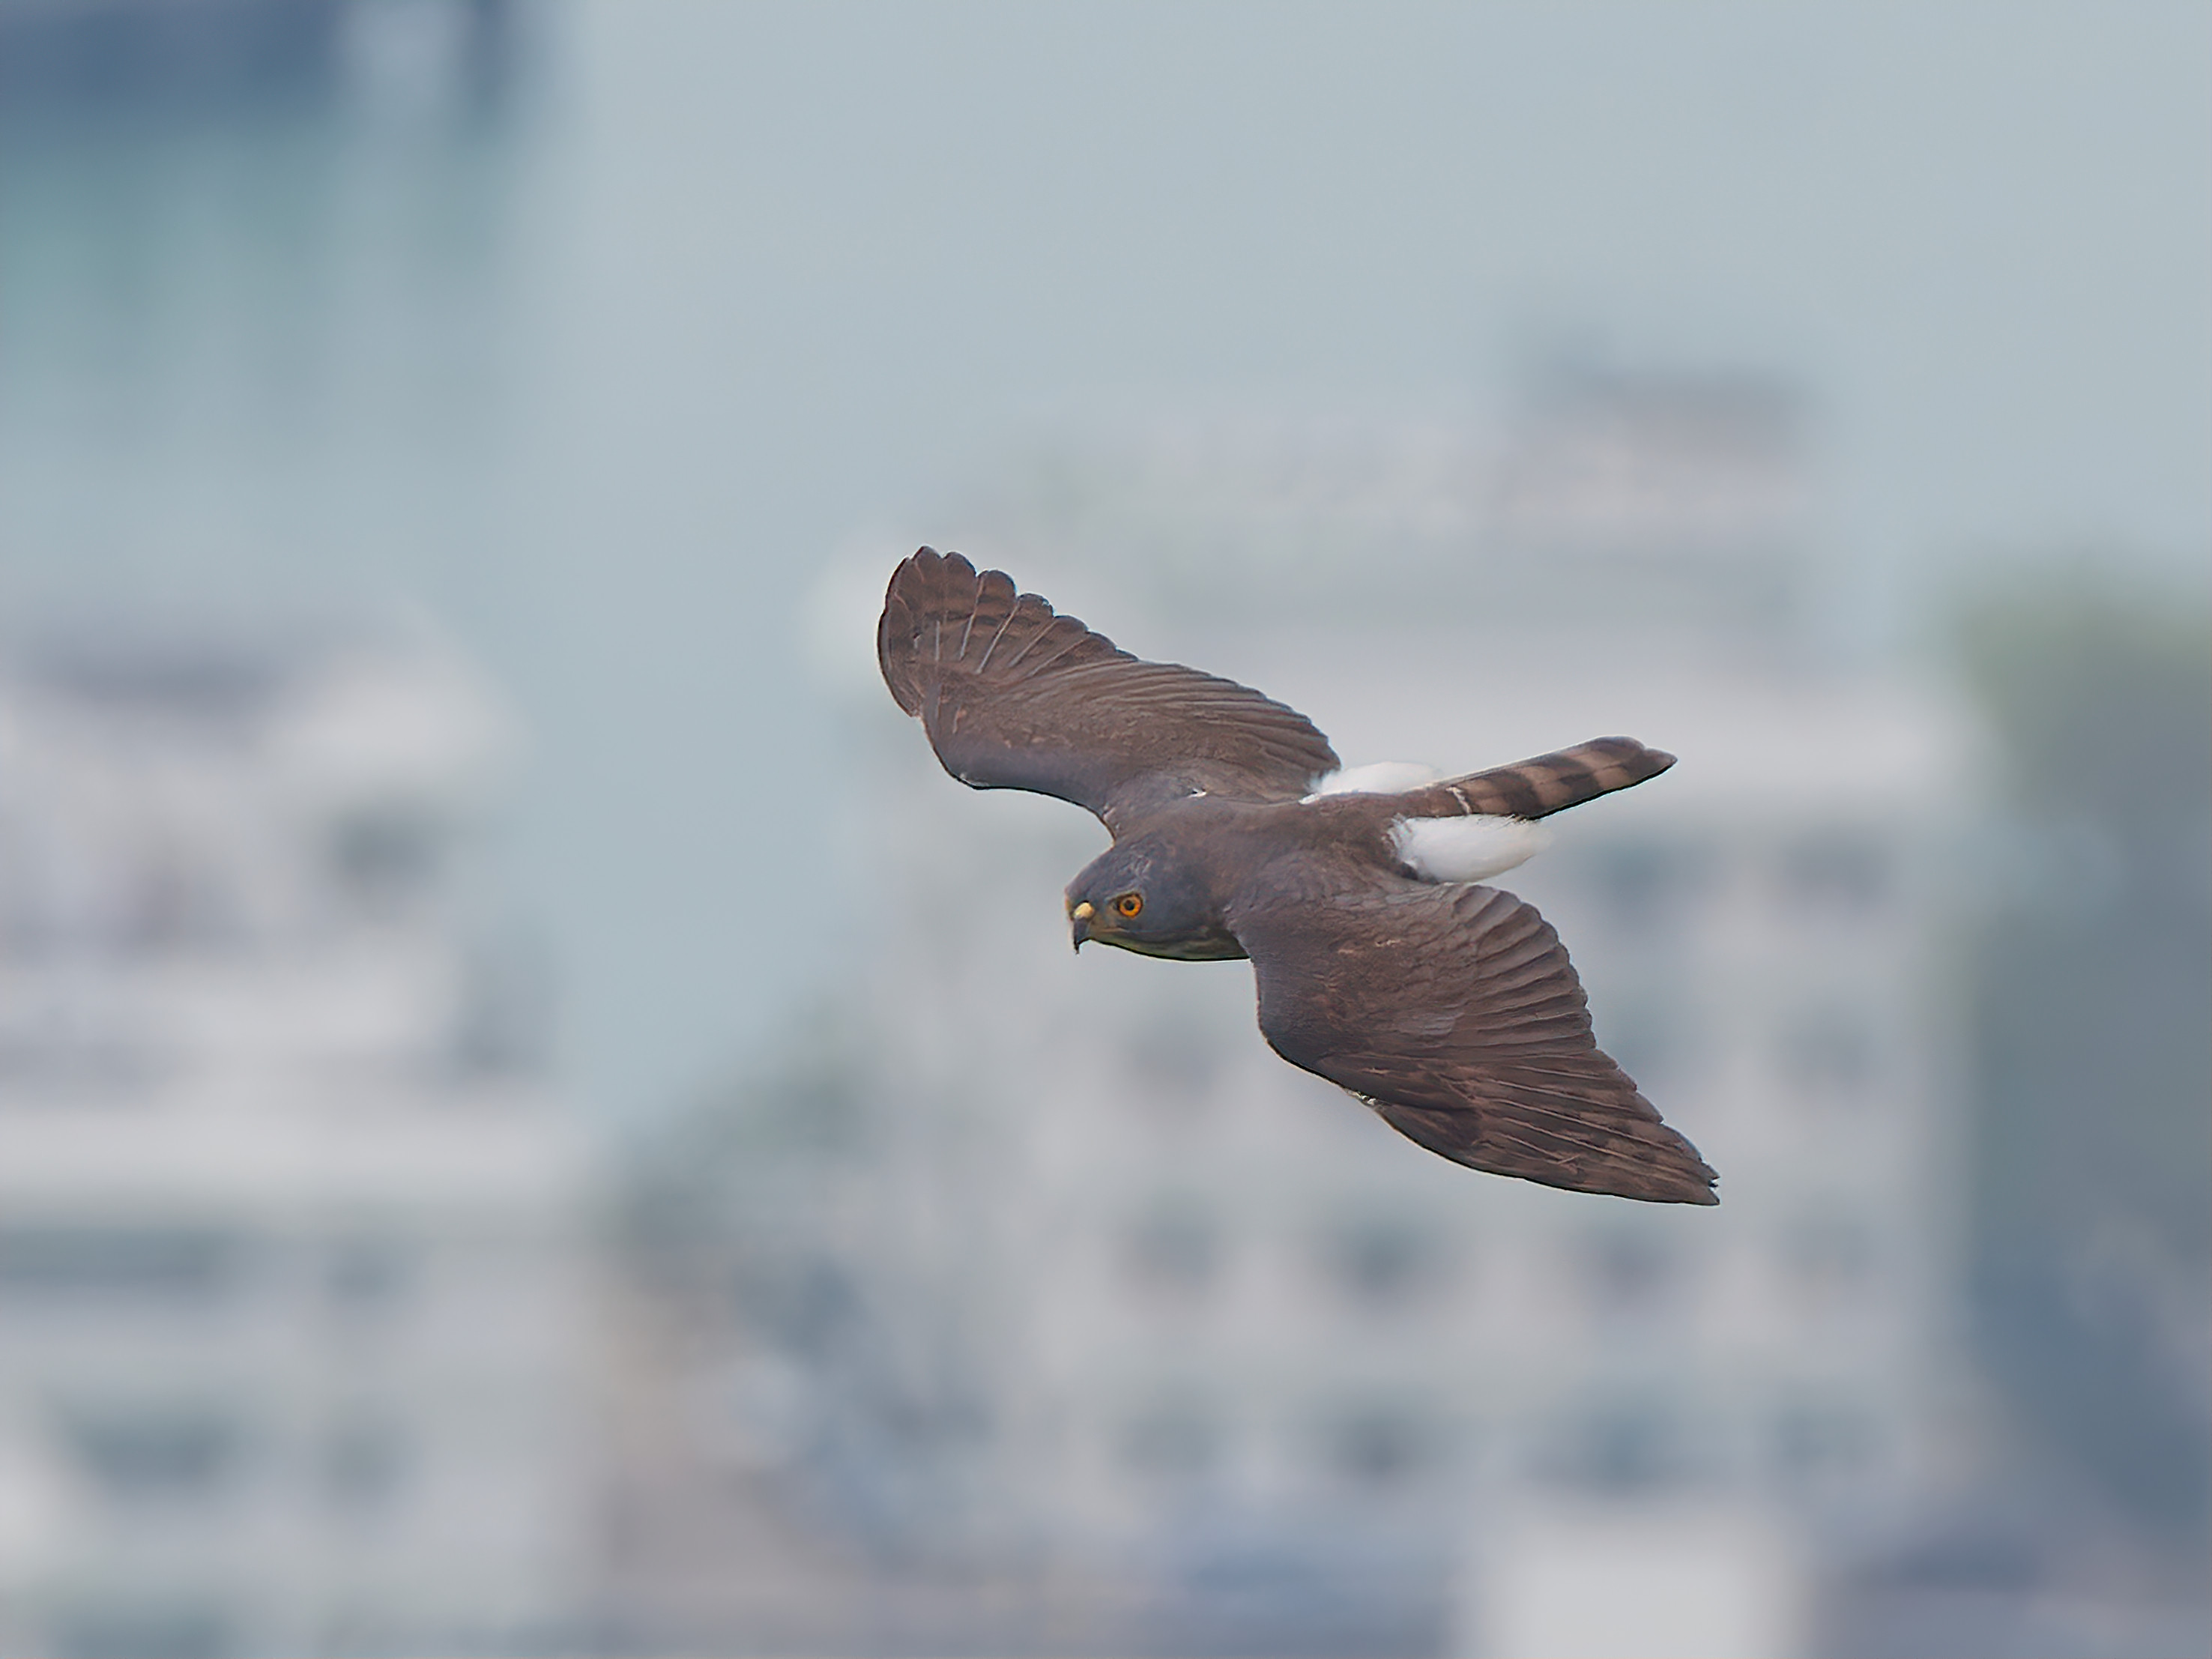 A crested Chinese sparrowhawk aiming to breed in the area above Shek Pik Prison on Lantau Island. As unlikely birds of prey grace Hong Kong during their spring migration, a birdwatcher learns the reason is a mix of survival strategy and strong wind. Photo: Martin Williams